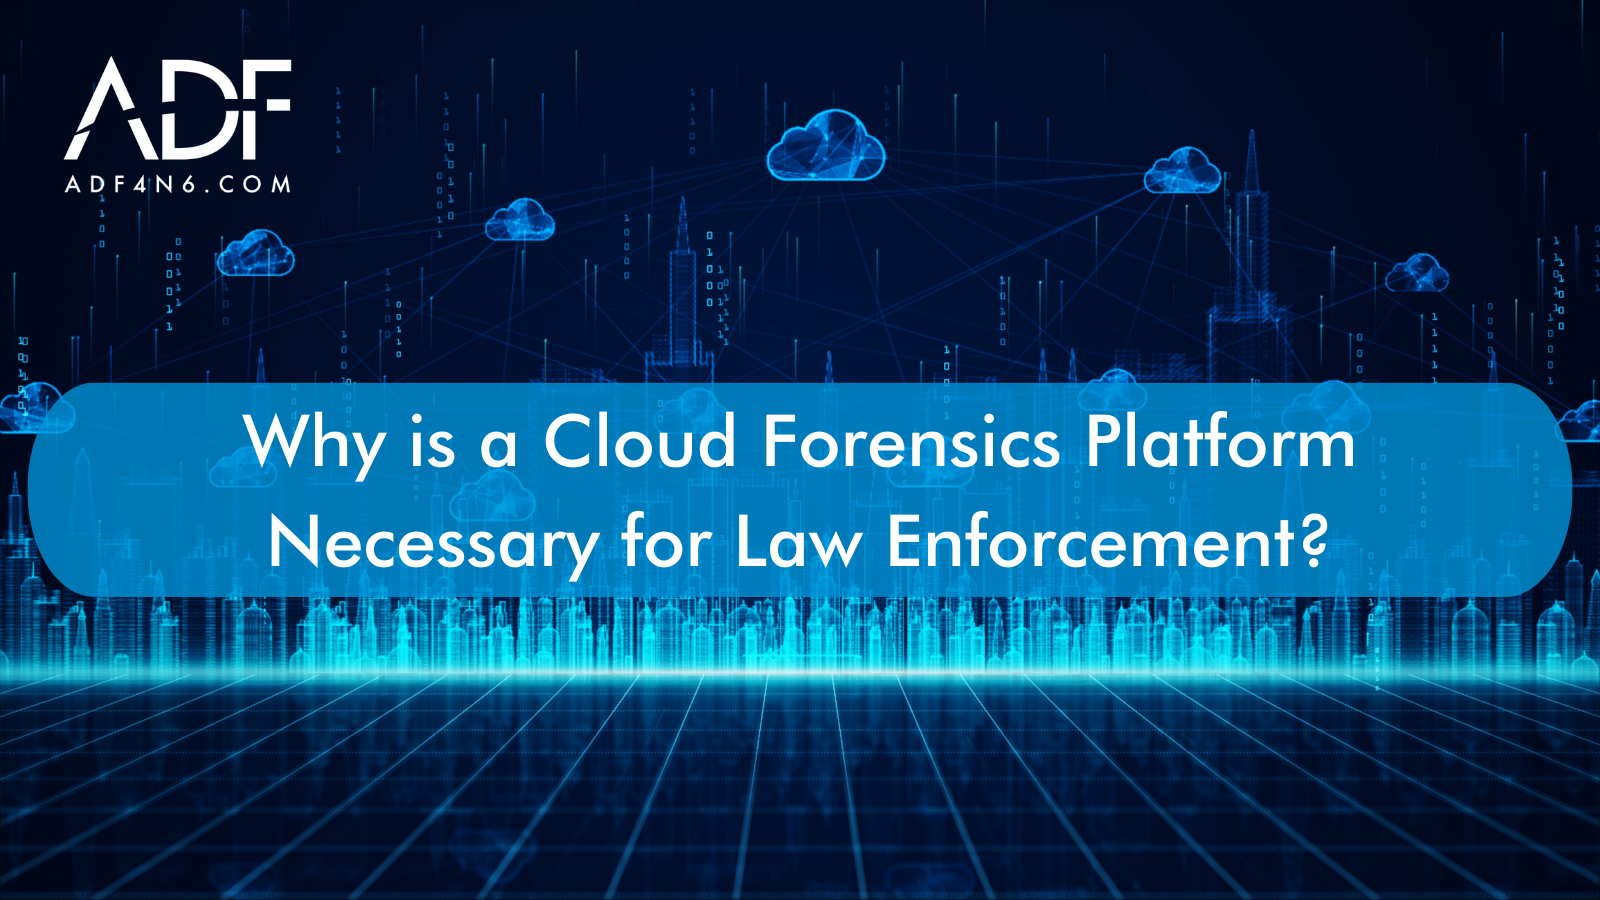 Why is a Cloud Forensics Platform essential for law enforcement?